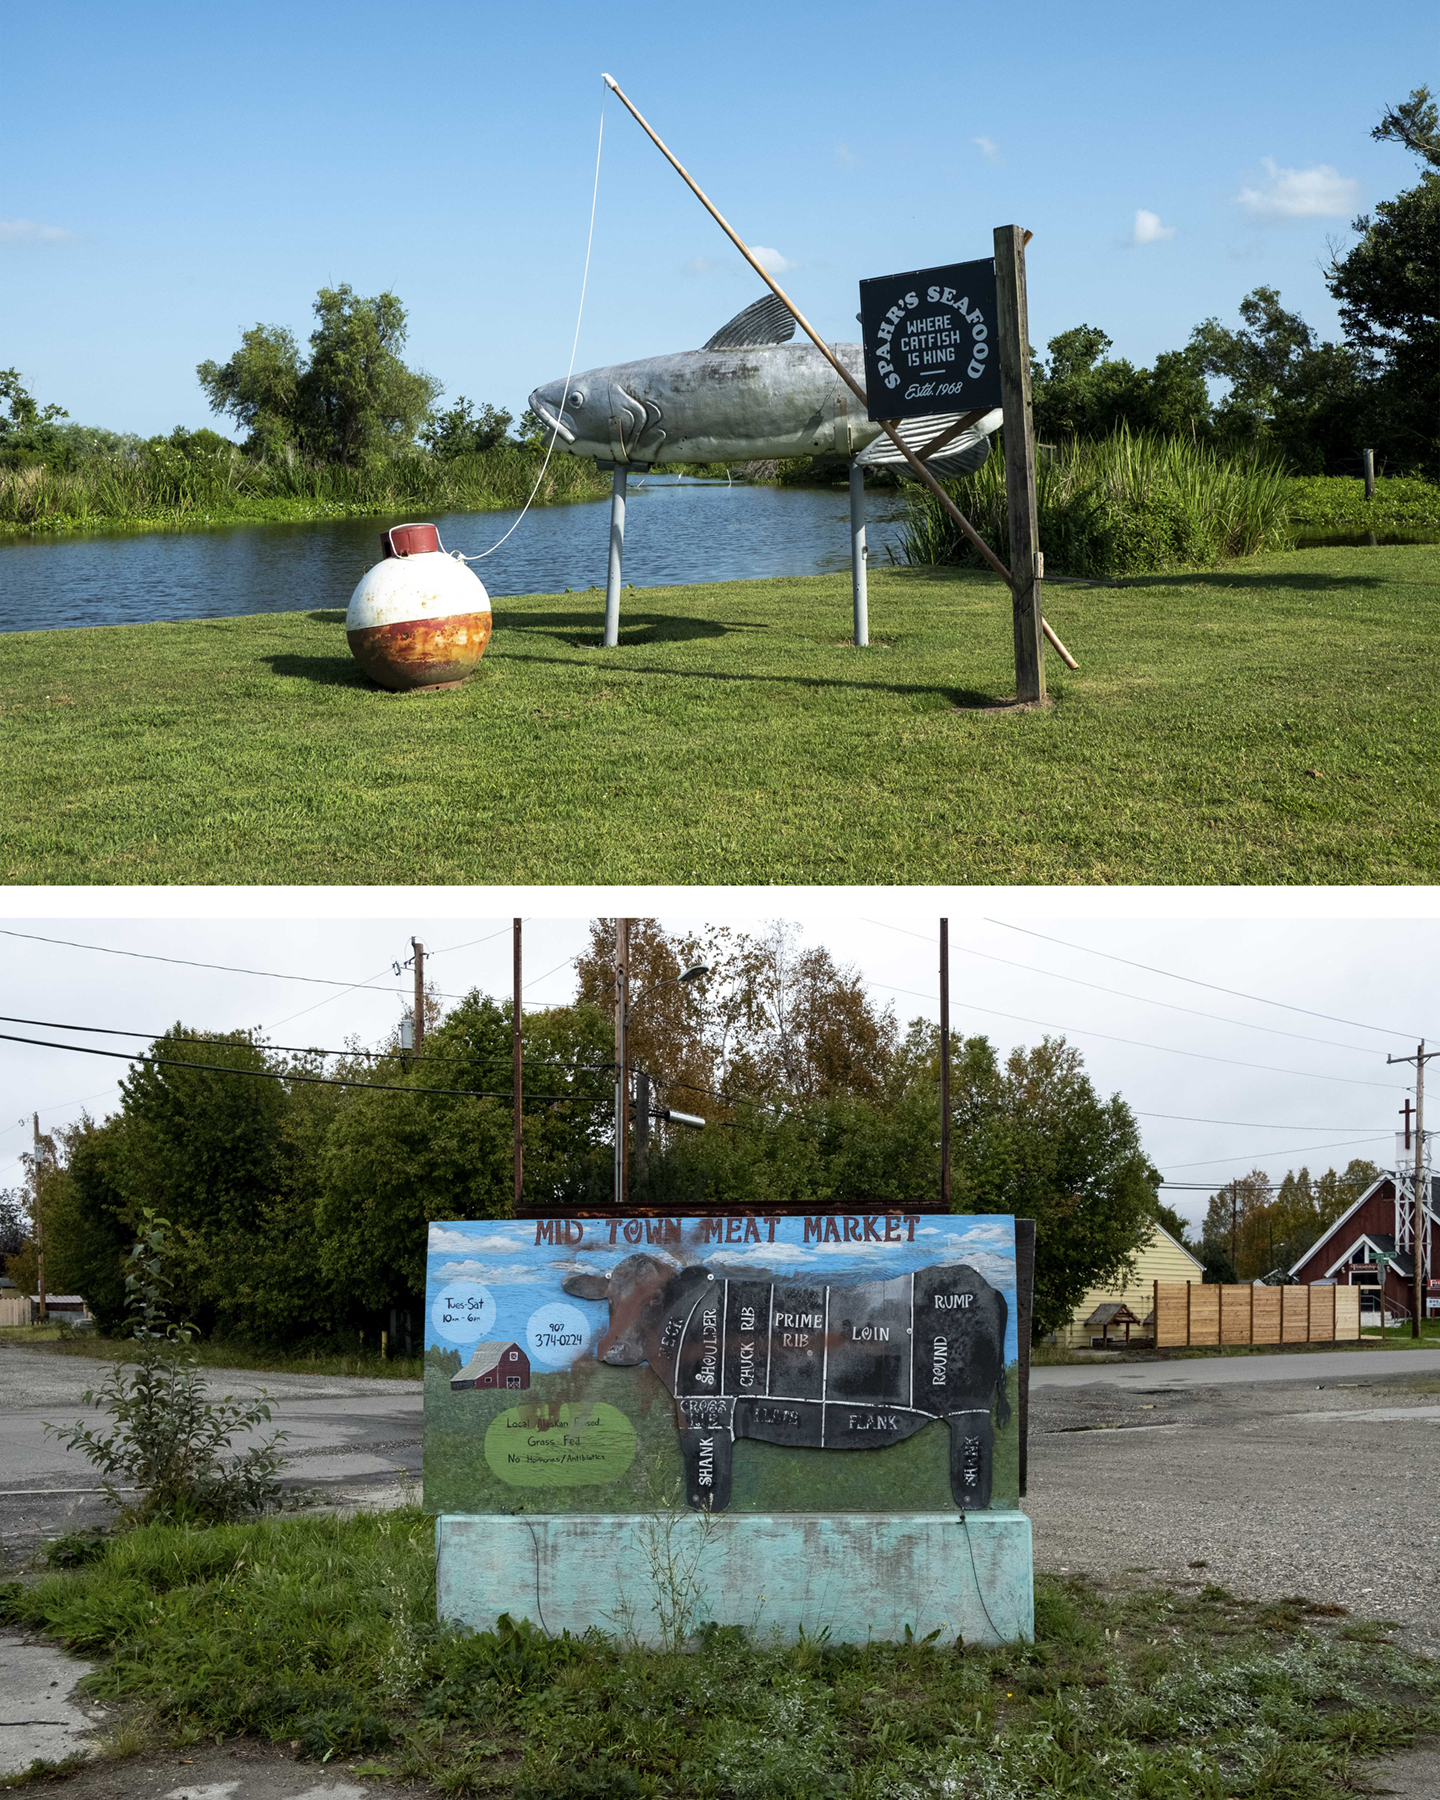 Fish statue and cow silhouette in Louisiana and Alaska, courtesy of the artist